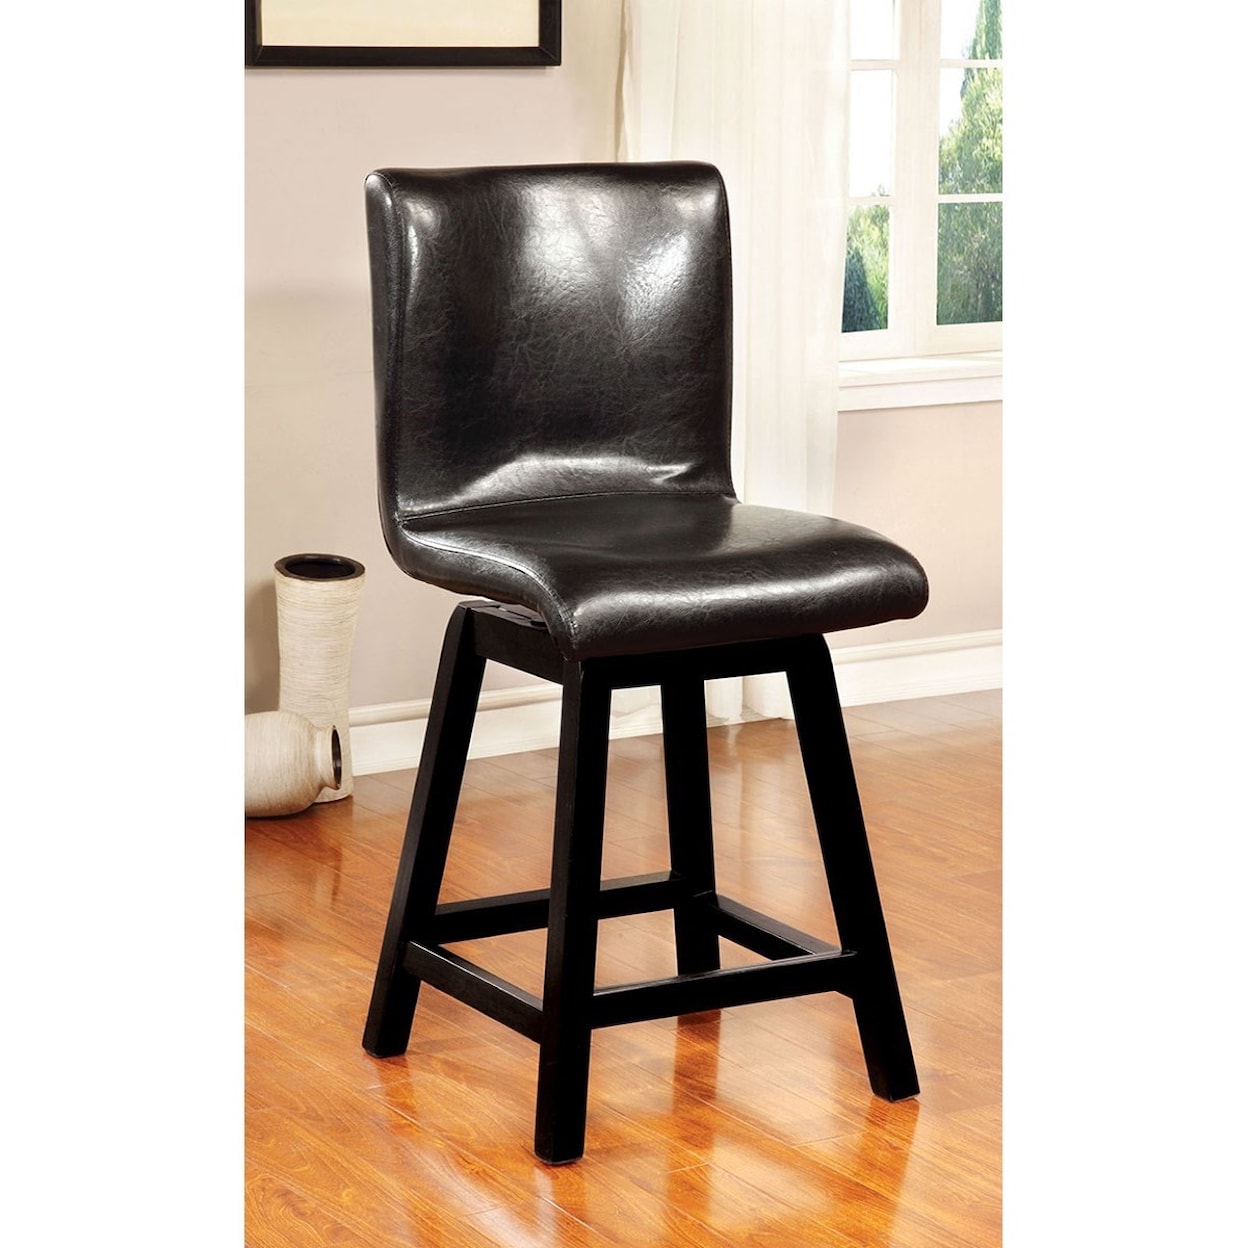 FUSA Hurley Set of 2 Counter Height Chairs